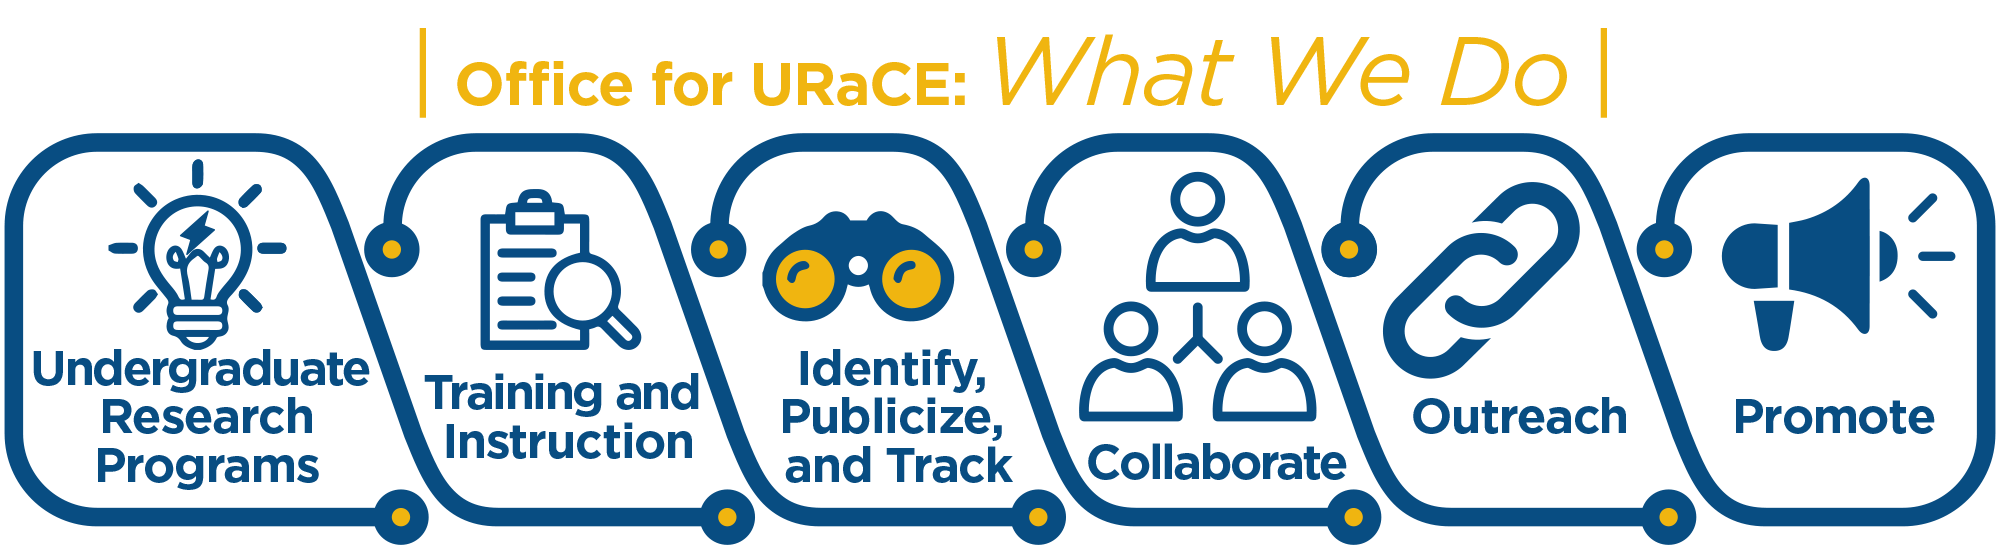 Office for URaCE: What We Do